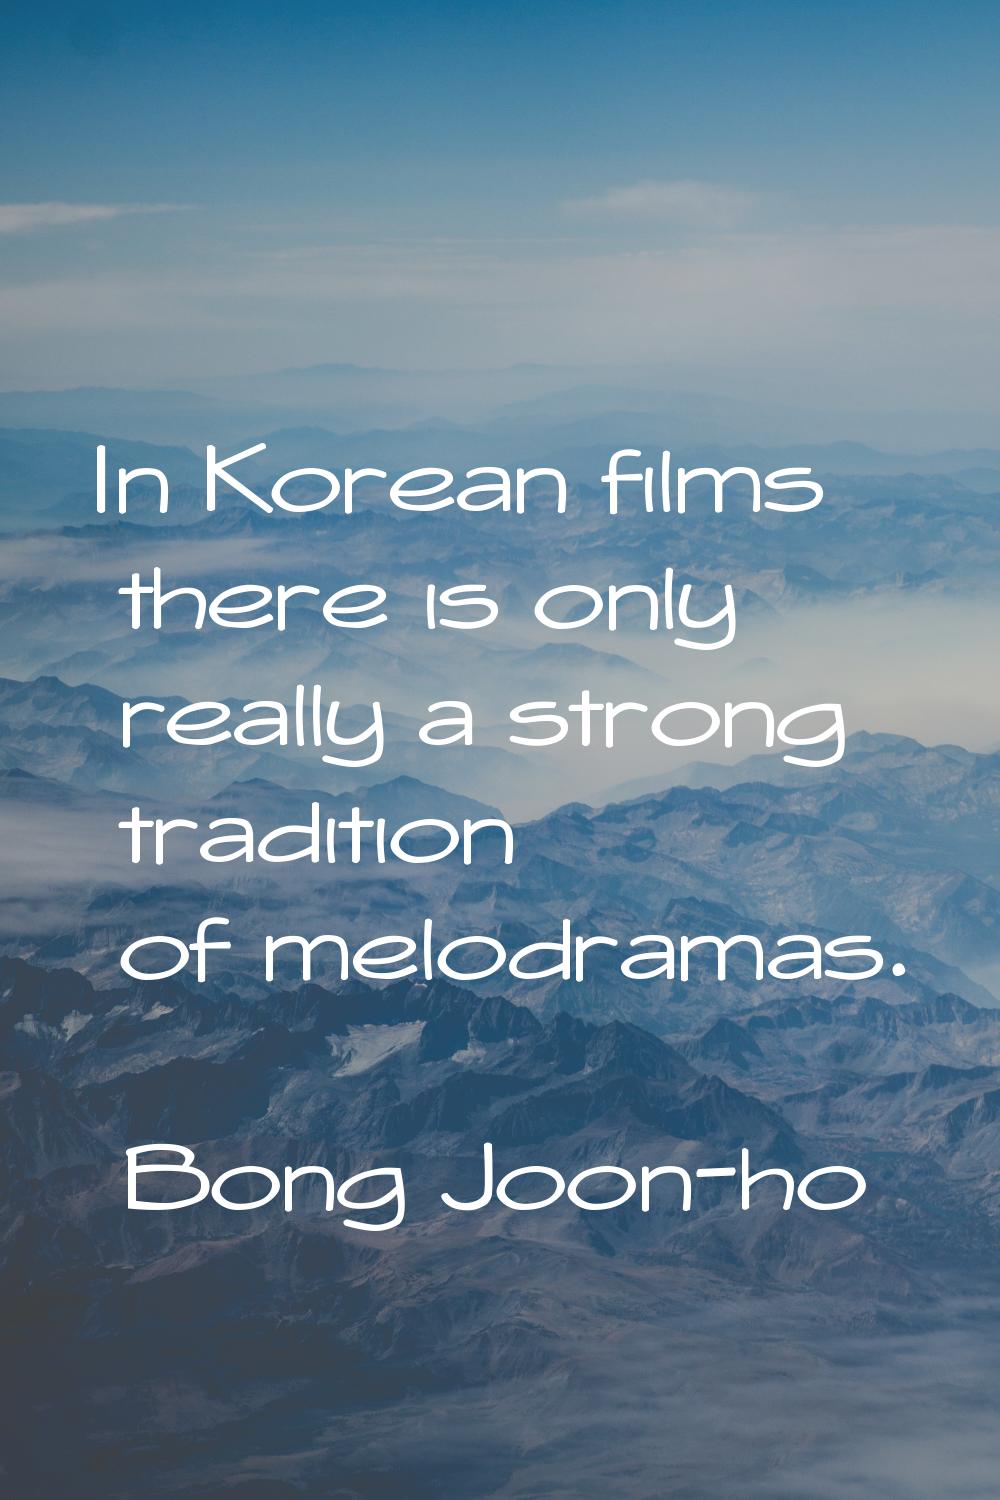 In Korean films there is only really a strong tradition of melodramas.